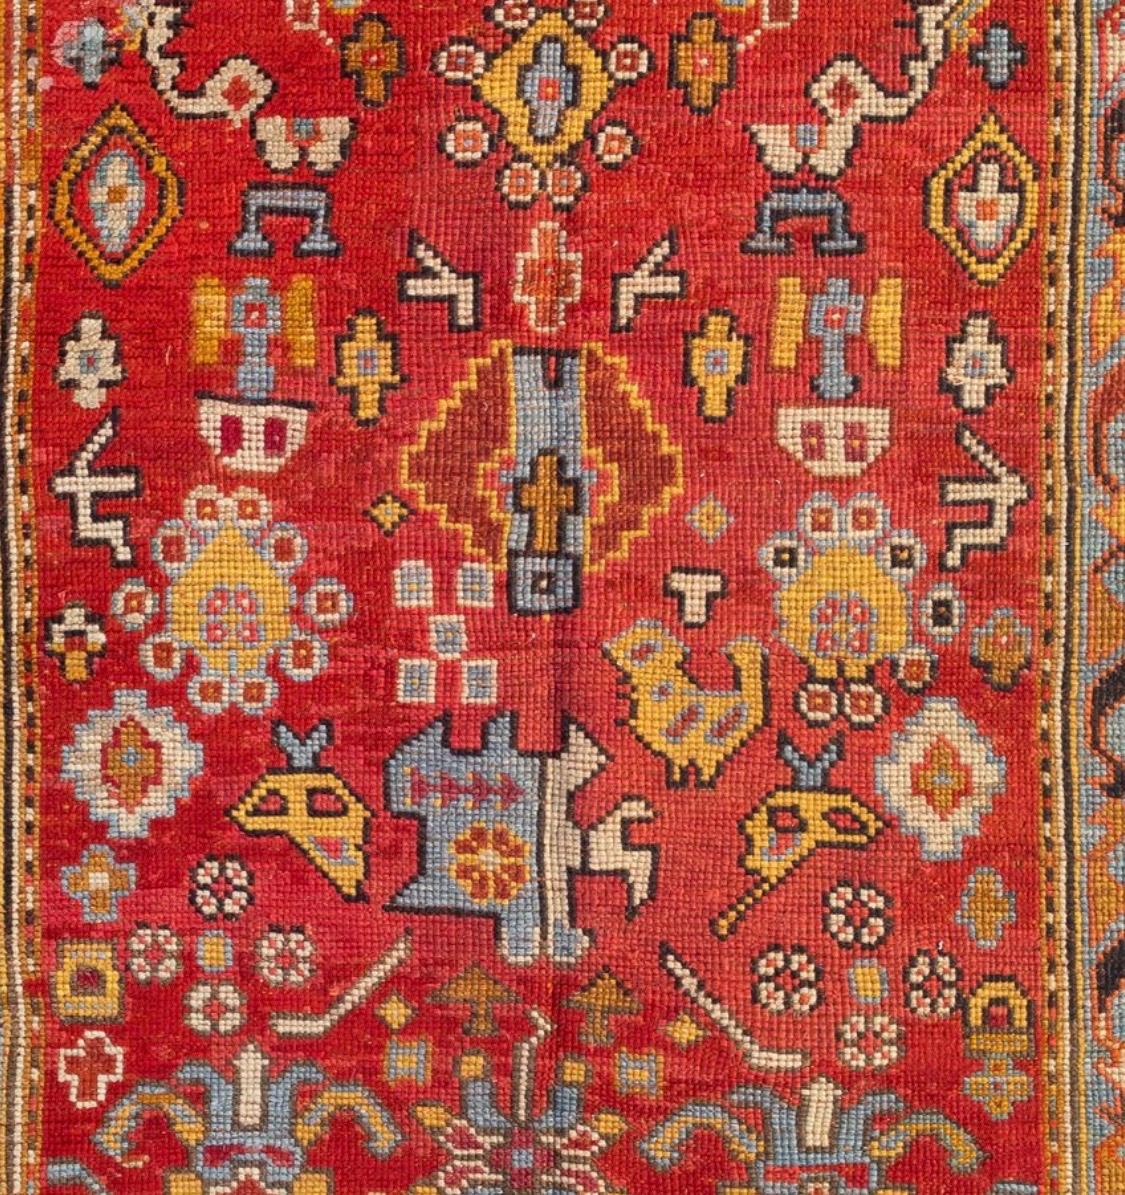 Pristine and finely woven hand knotted antique square red gold light blue Turkish Oushak area rug, circa 1880-1900. It measures 4 x 4.4 ft.
   